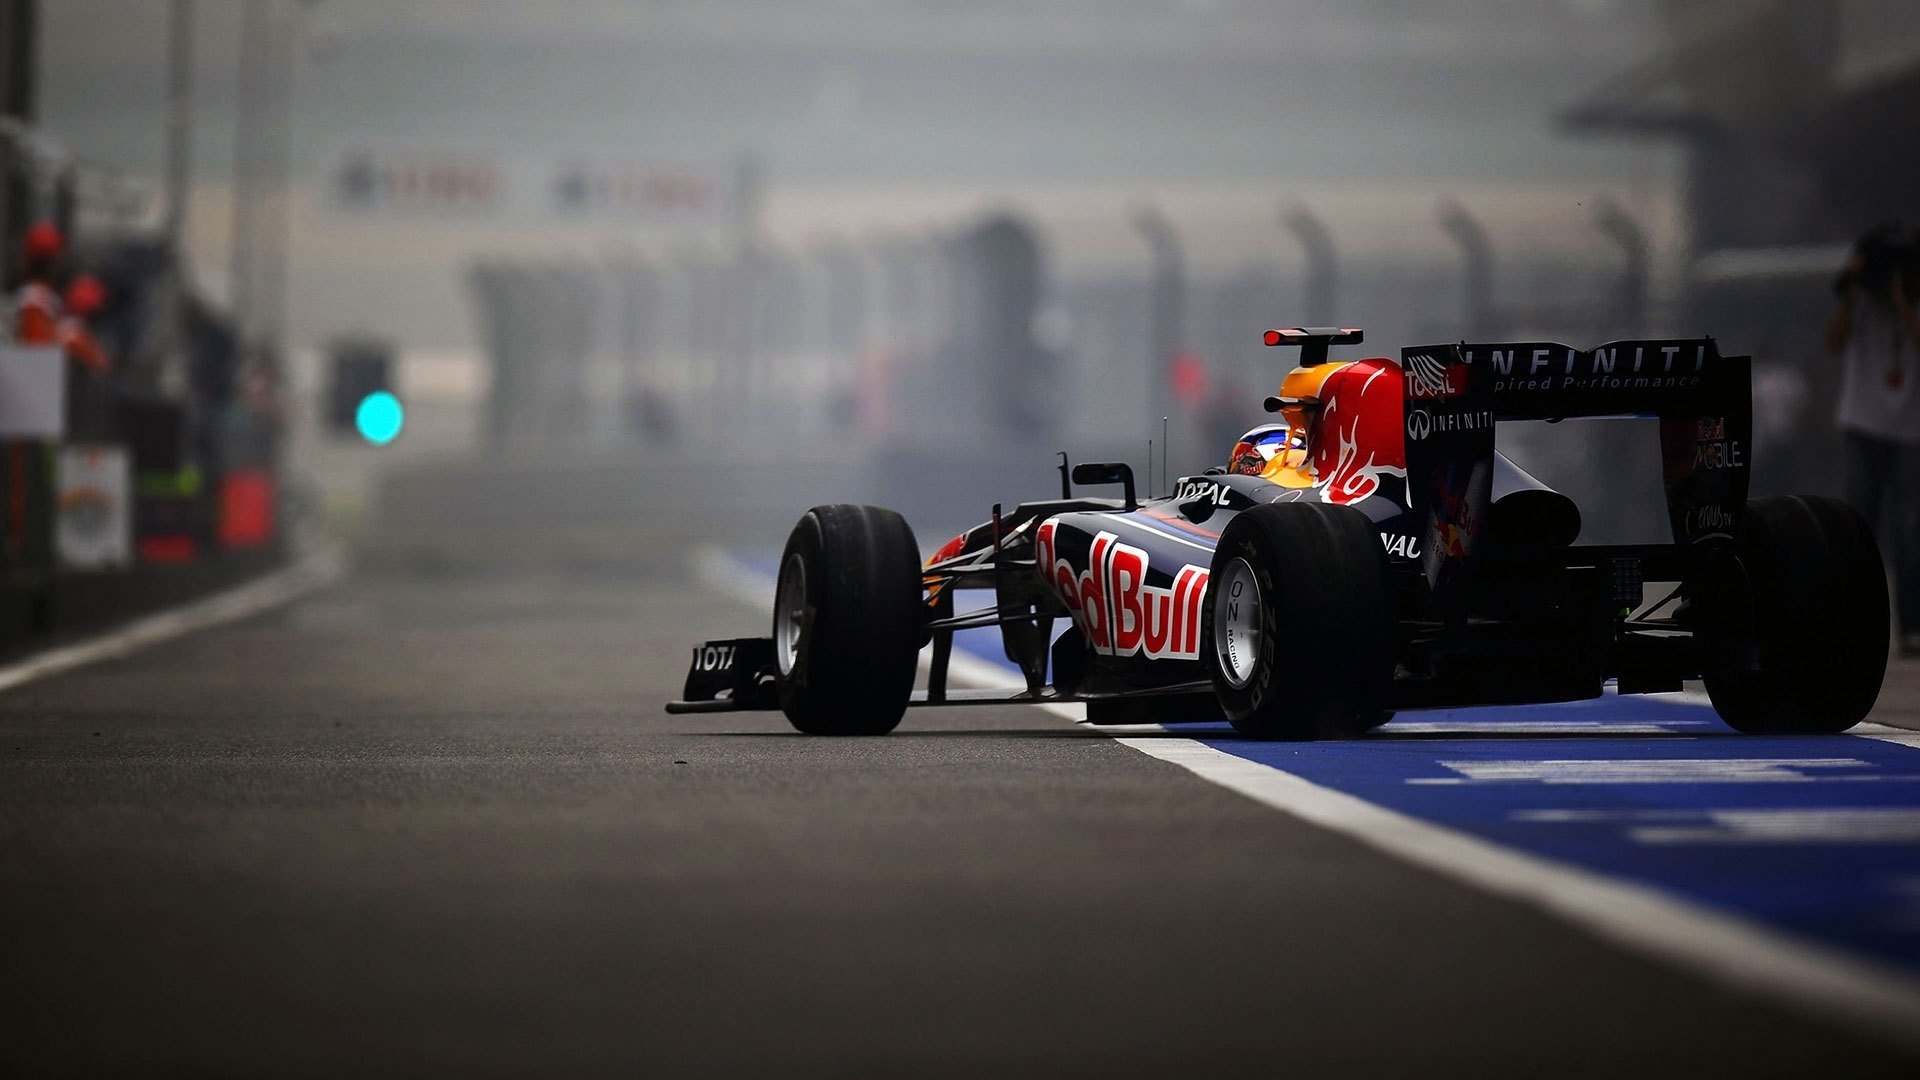 10 Top Formula 1 Hd Wallpaper FULL HD 1920×1080 For PC Background